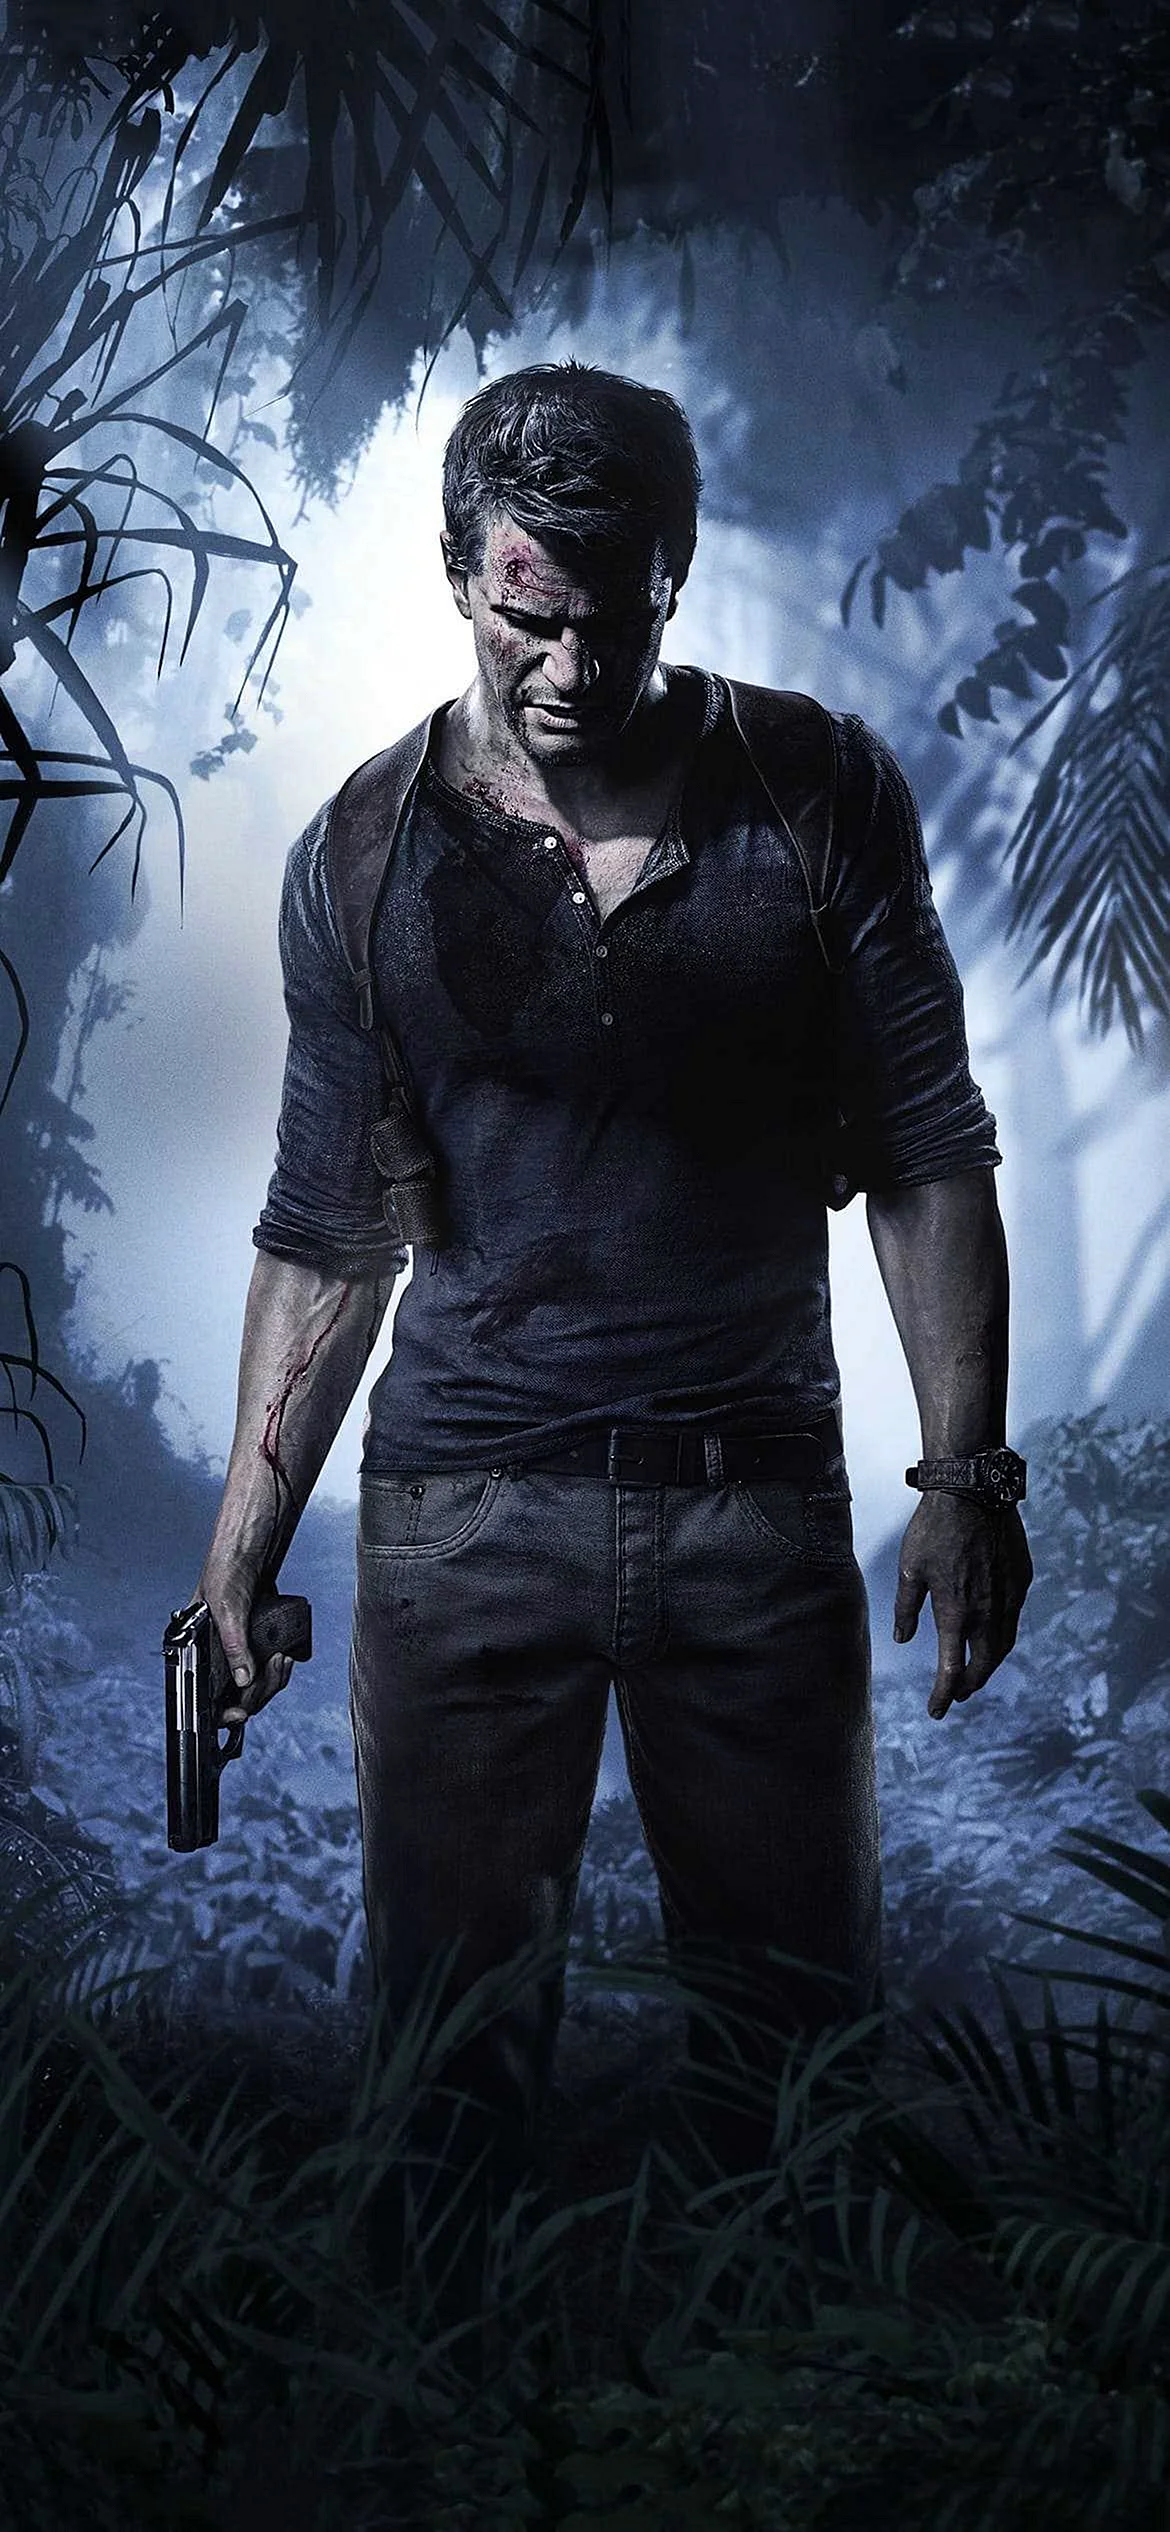 Thiefs End Uncharted 5 Wallpaper for iPhone 12 Pro